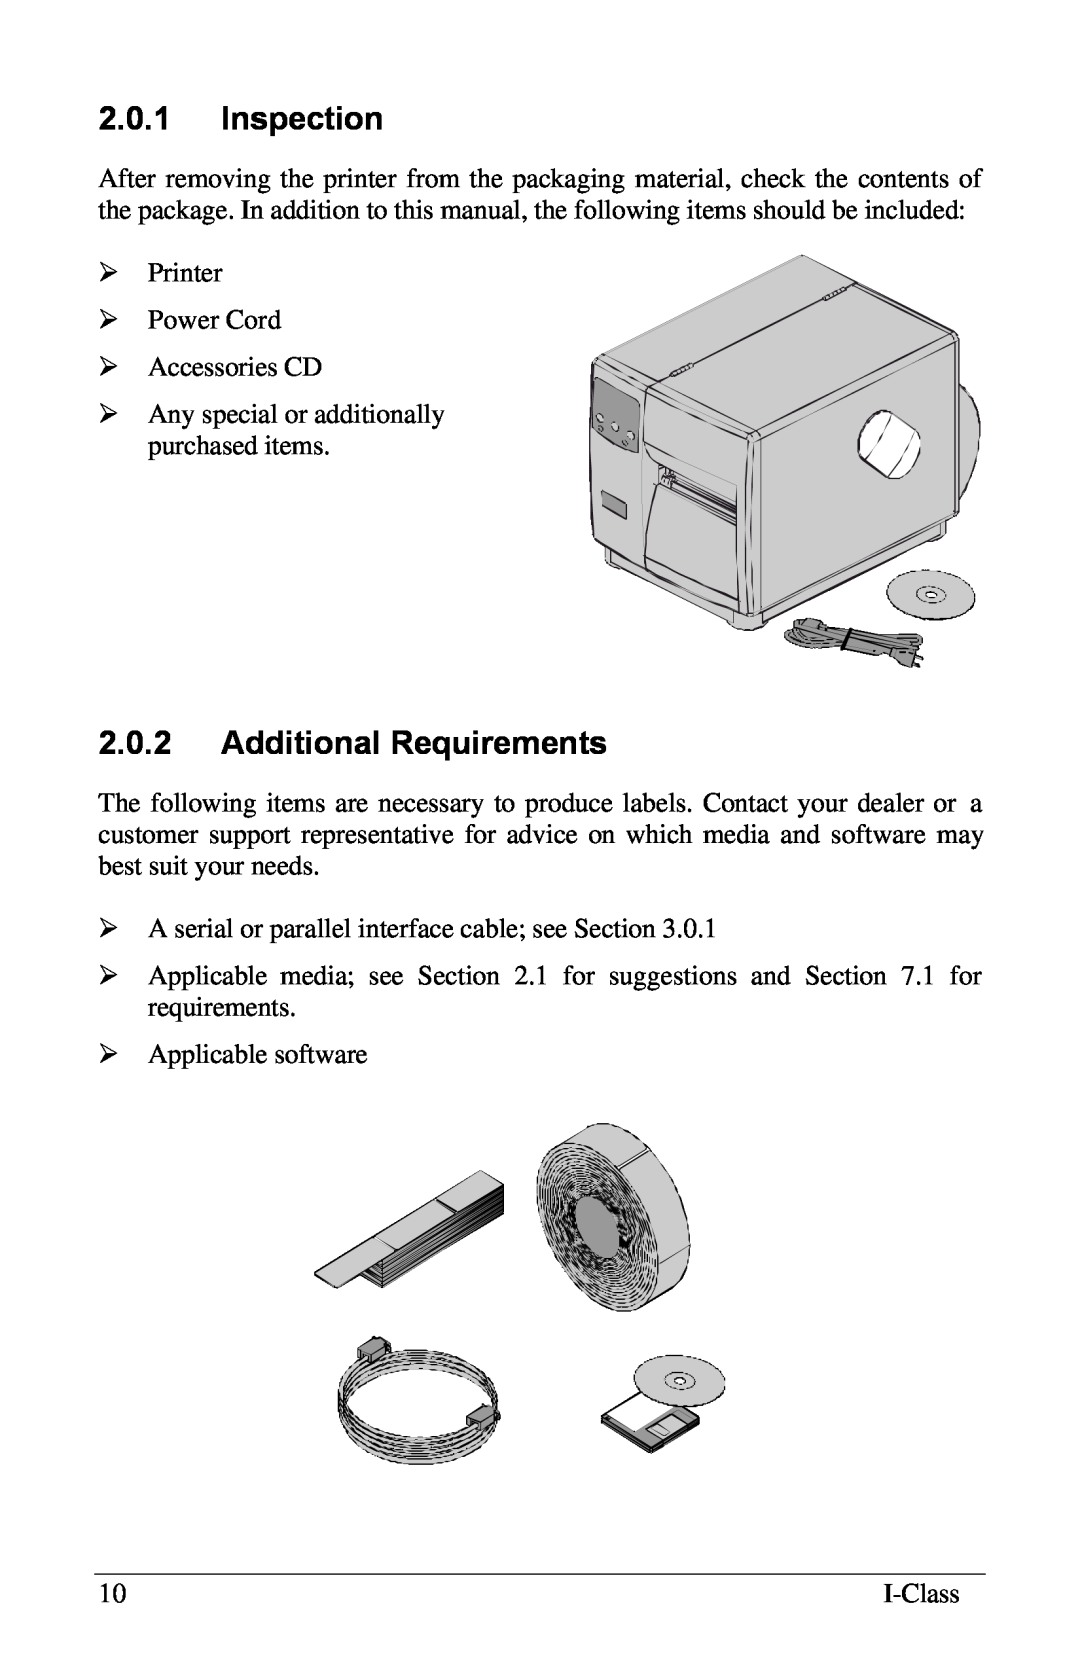 Xerox I Class manual 2.0.1Inspection, 2.0.2Additional Requirements 